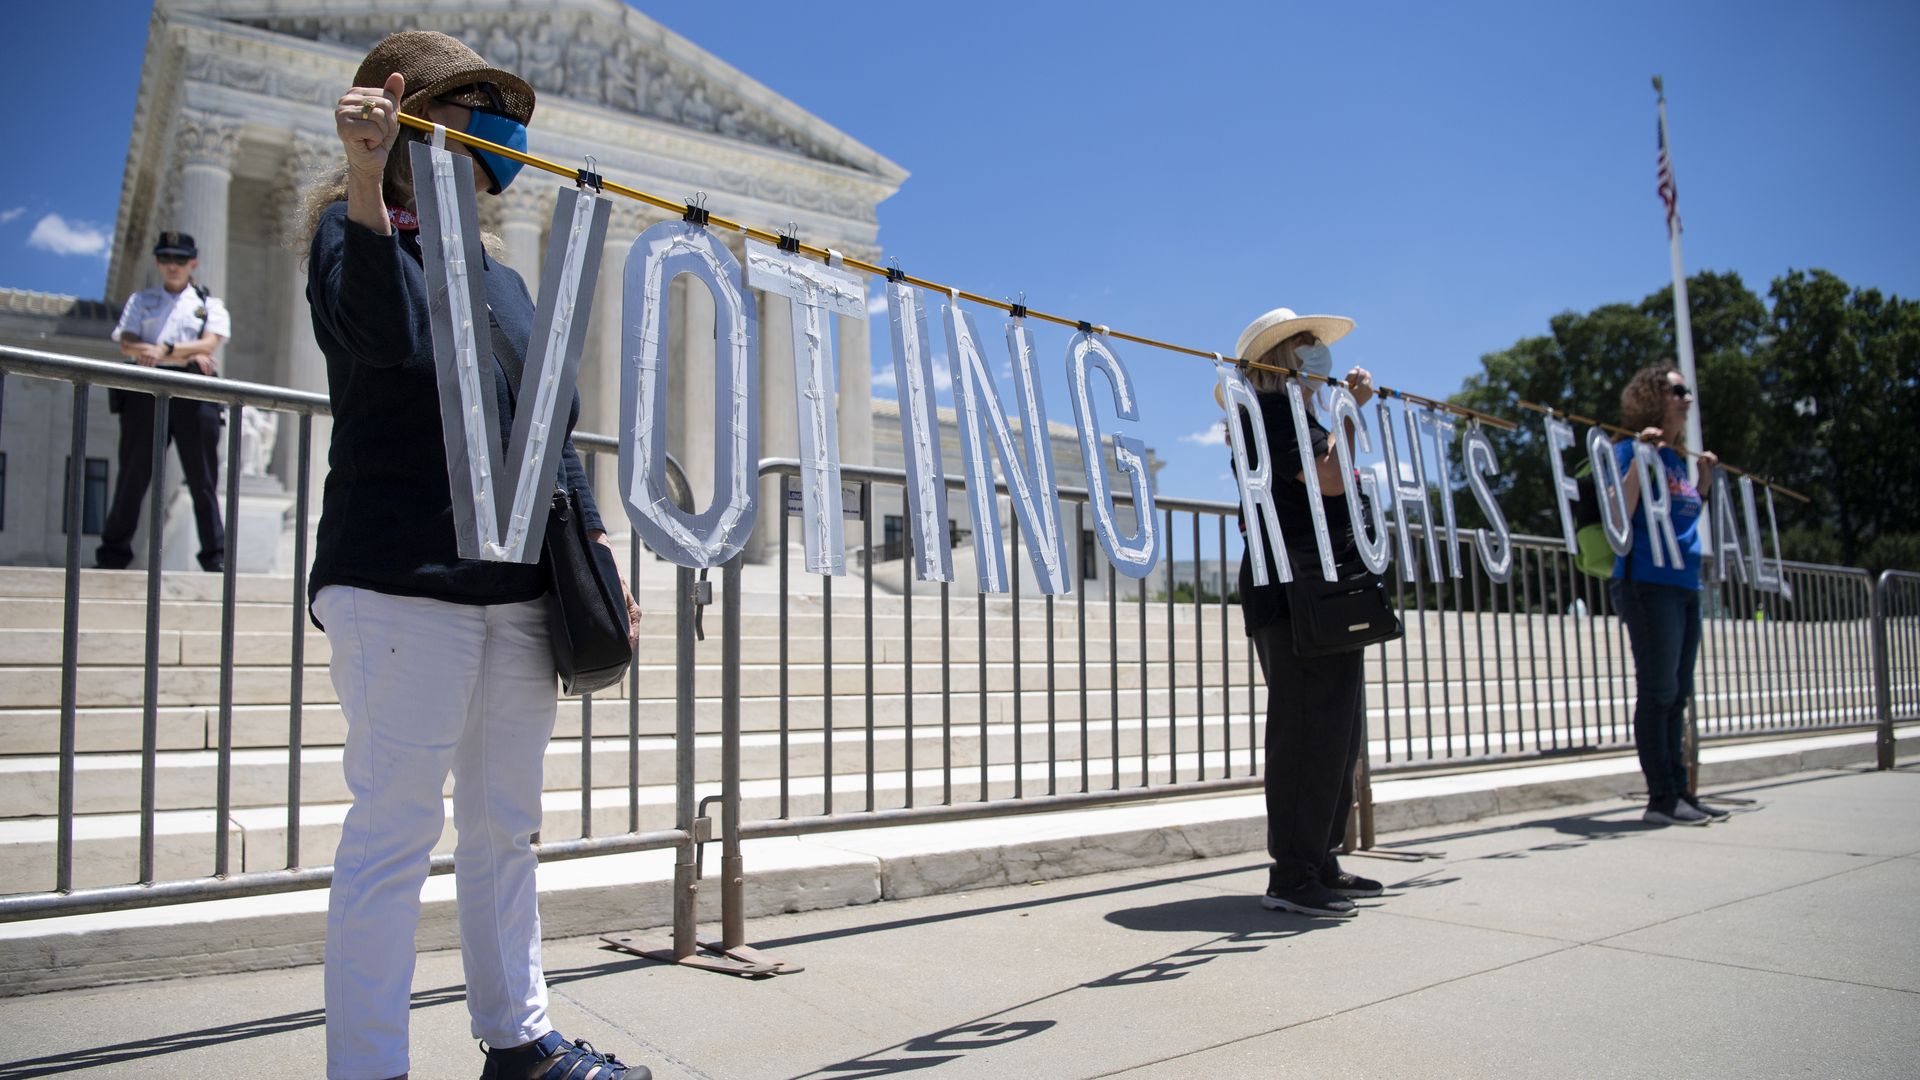 People holding a sign that reads "Voting rights for all" in front of the Supreme Court building in Washington, D.C., in June 2021.